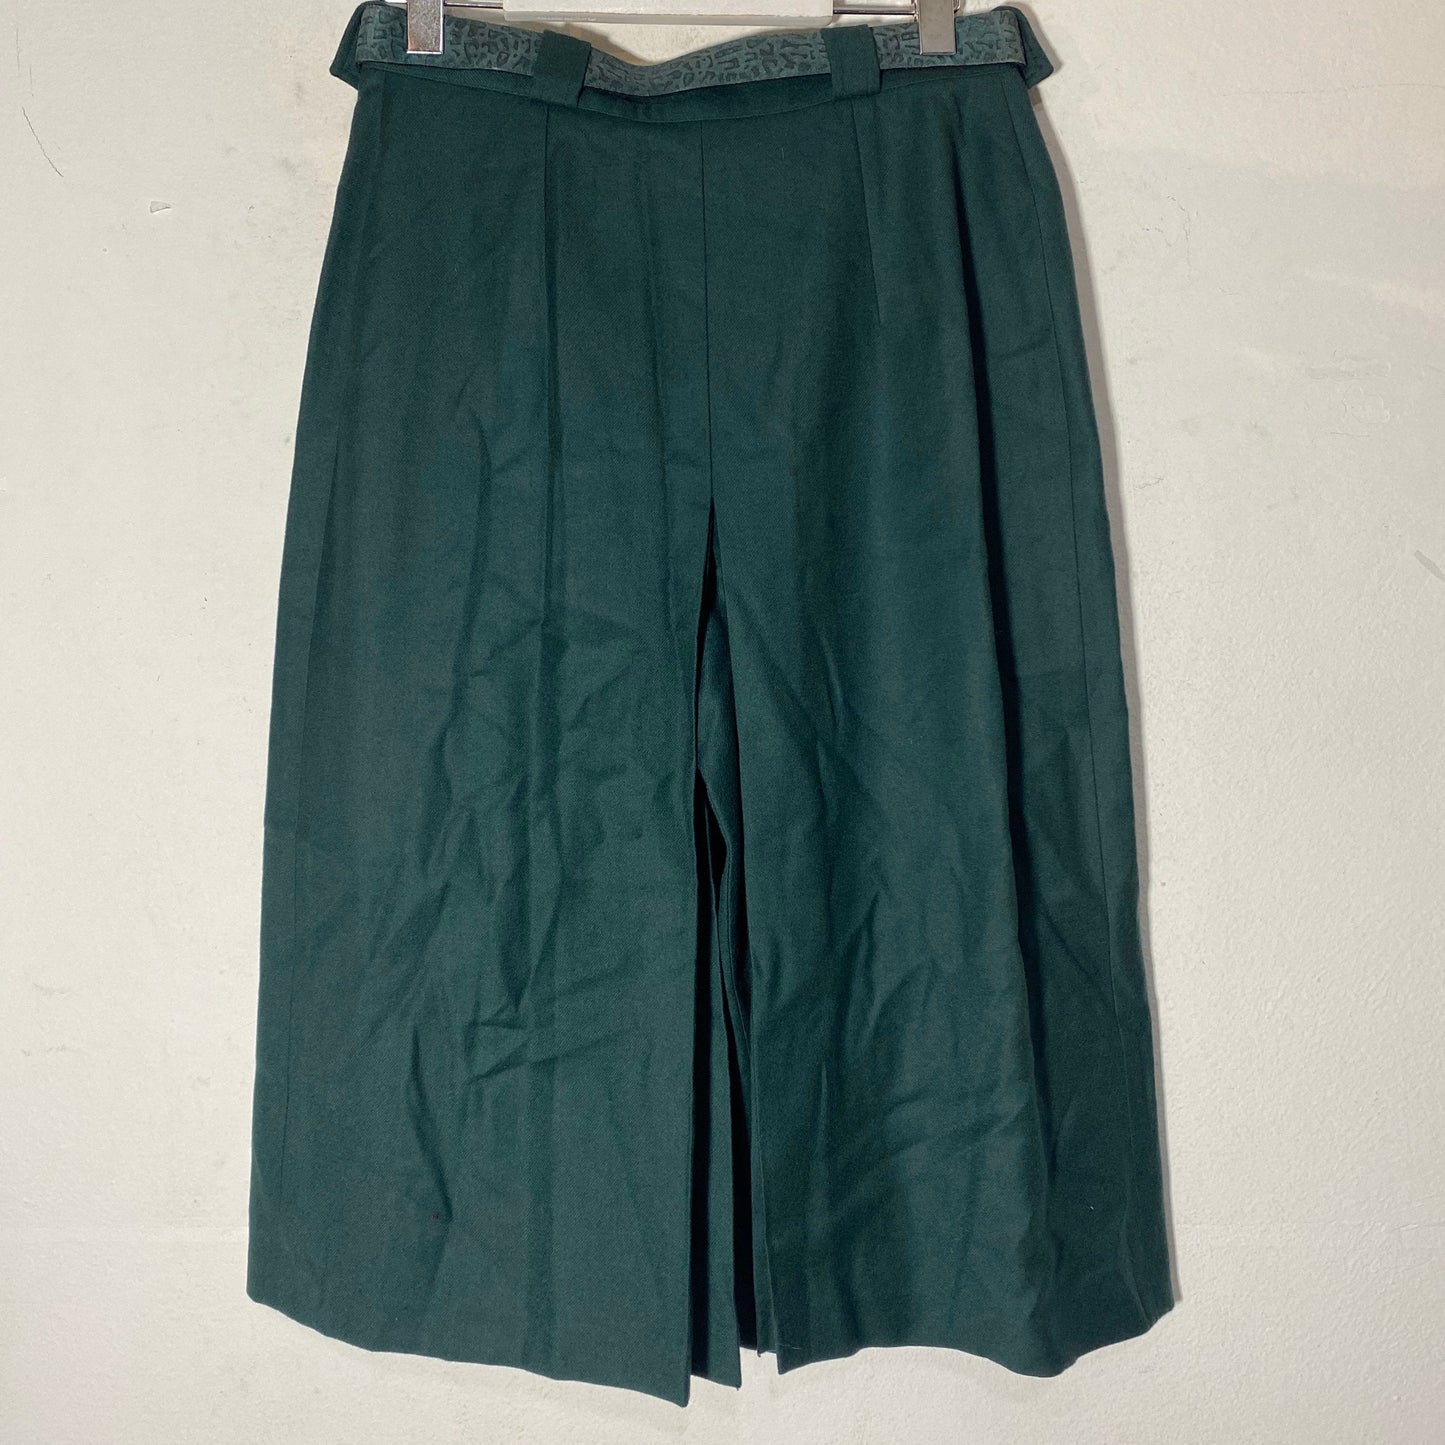 Vintage 70s petrol green pant-skirt made in Itaky, new with tags, belt included.